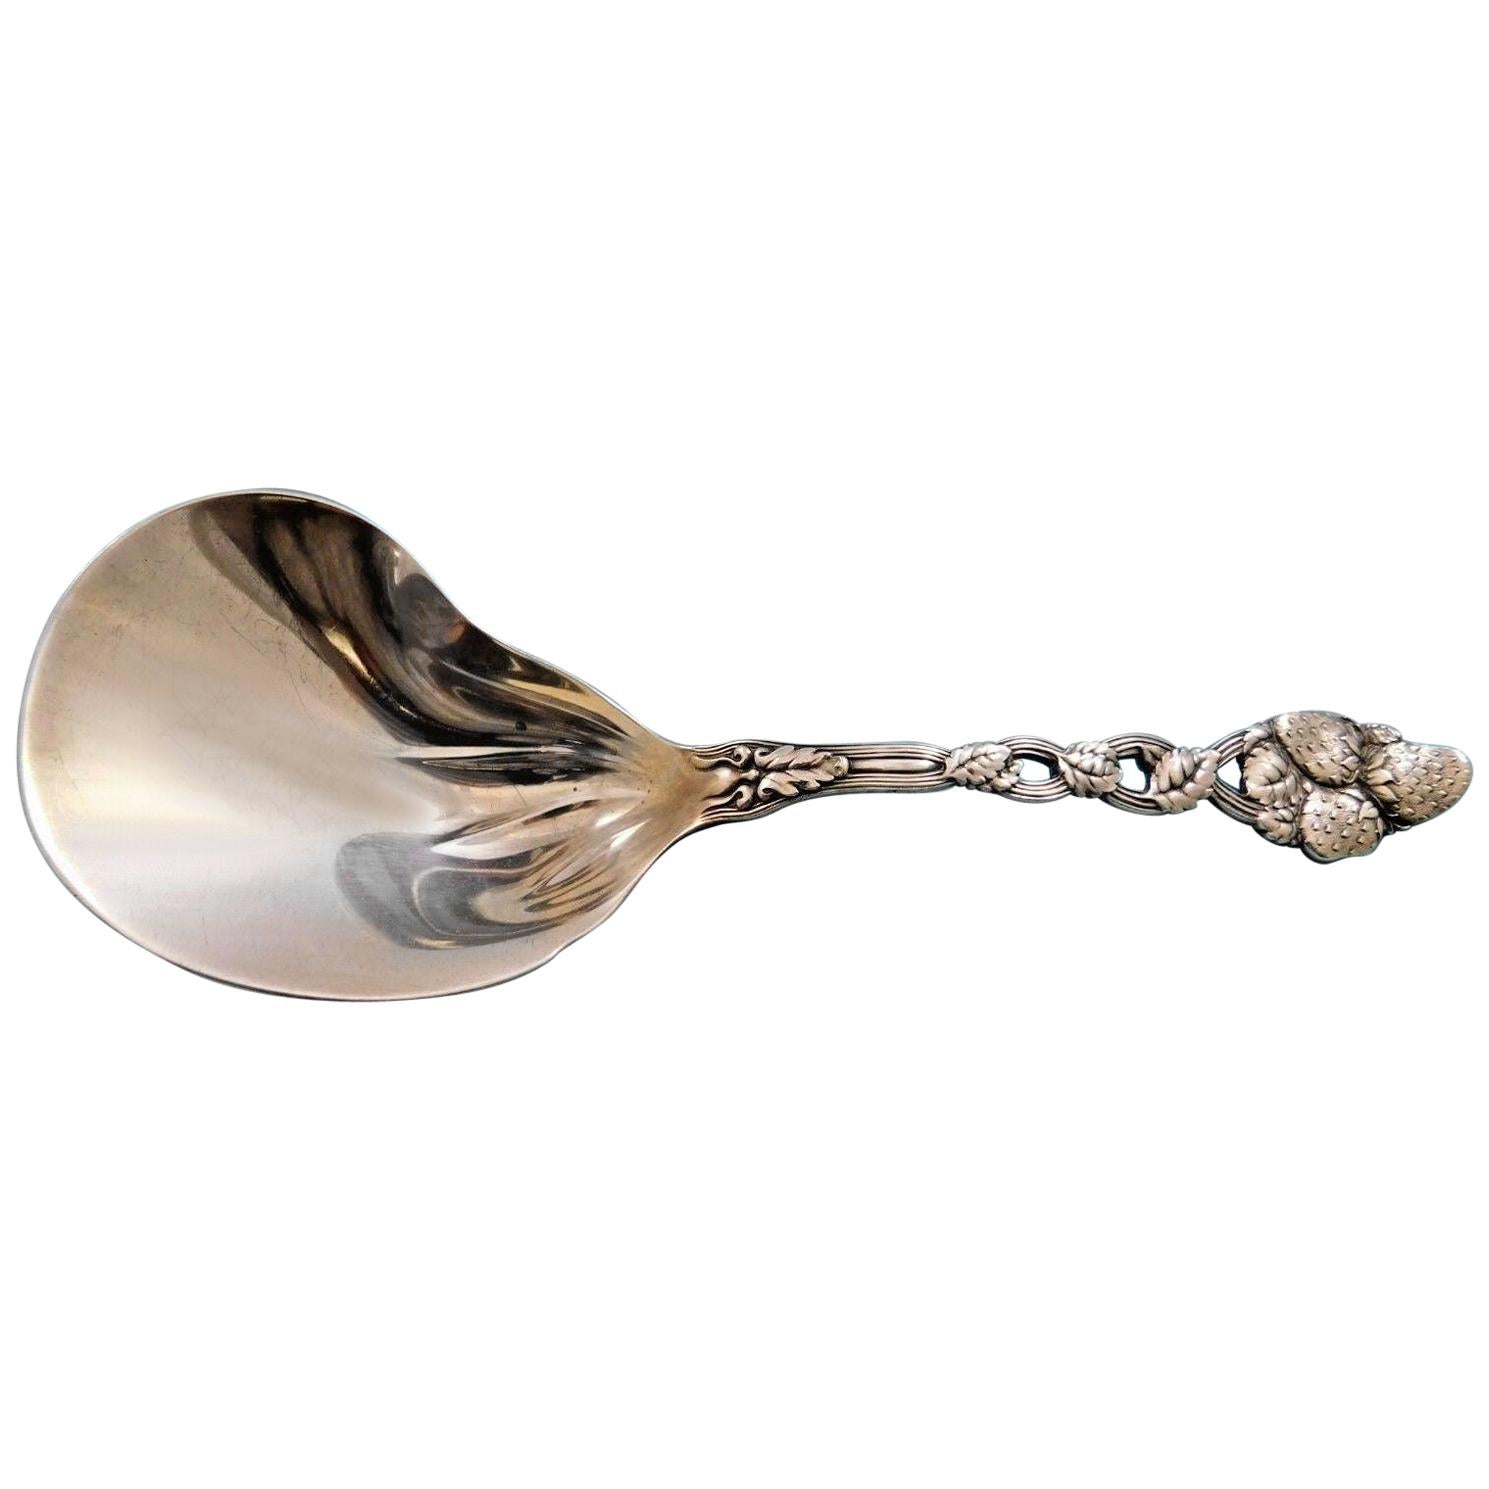 Strawberry Vine by Tiffany & Co. Sterling Silver Berry Spoon Conch Shell